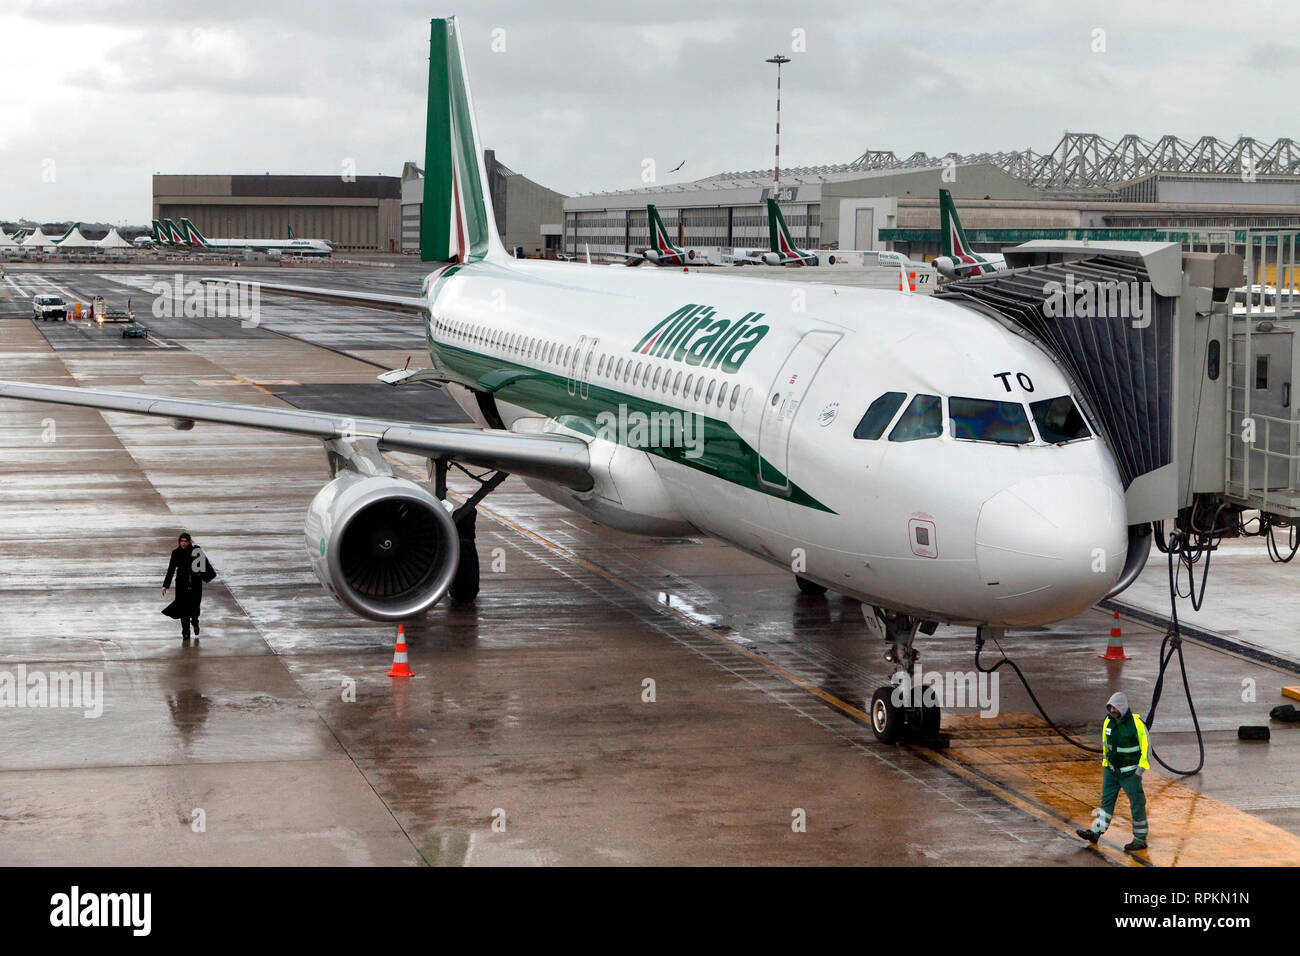 An Alitalia airplane is prepared and fueled for departure at Fiumicino airport Stock Photo